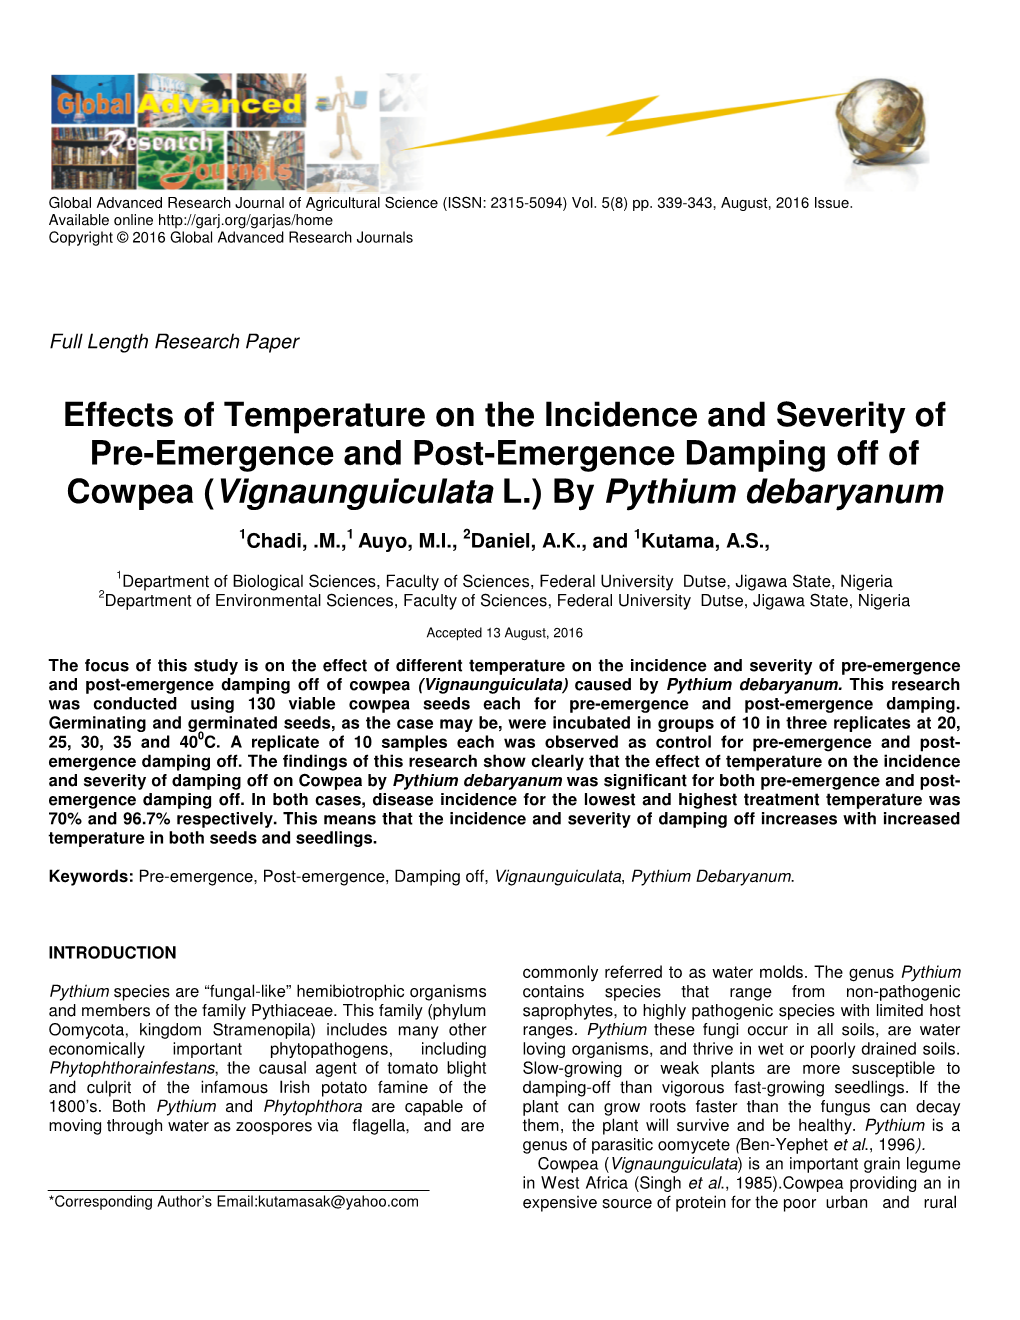 Effects of Temperature on the Incidence and Severity of Pre-Emergence and Post-Emergence Damping Off of Cowpea ( Vignaunguiculata L.) by Pythium Debaryanum